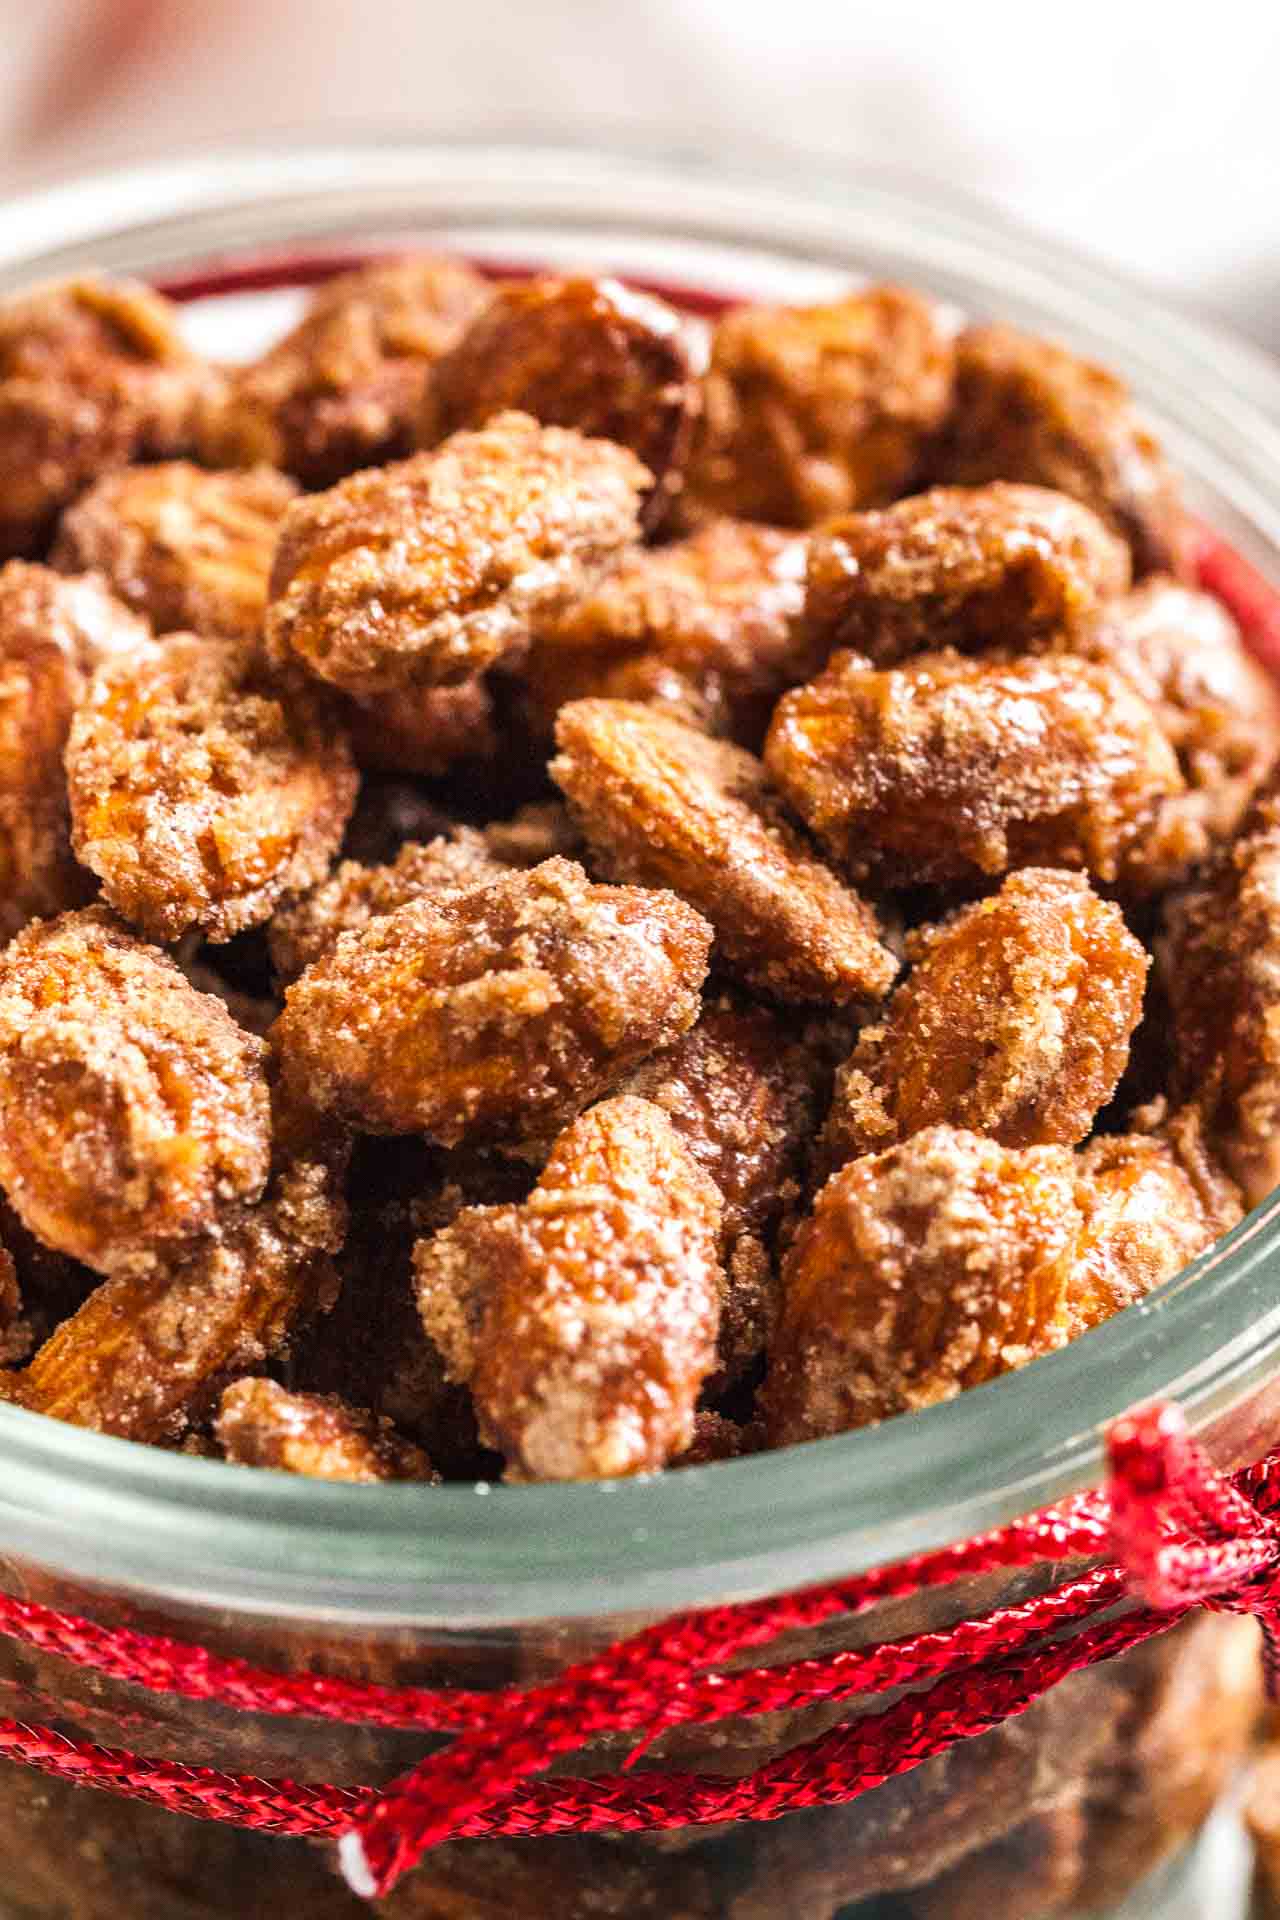 A glass bowl of cinnamon candied almonds with a red ribbon around it.